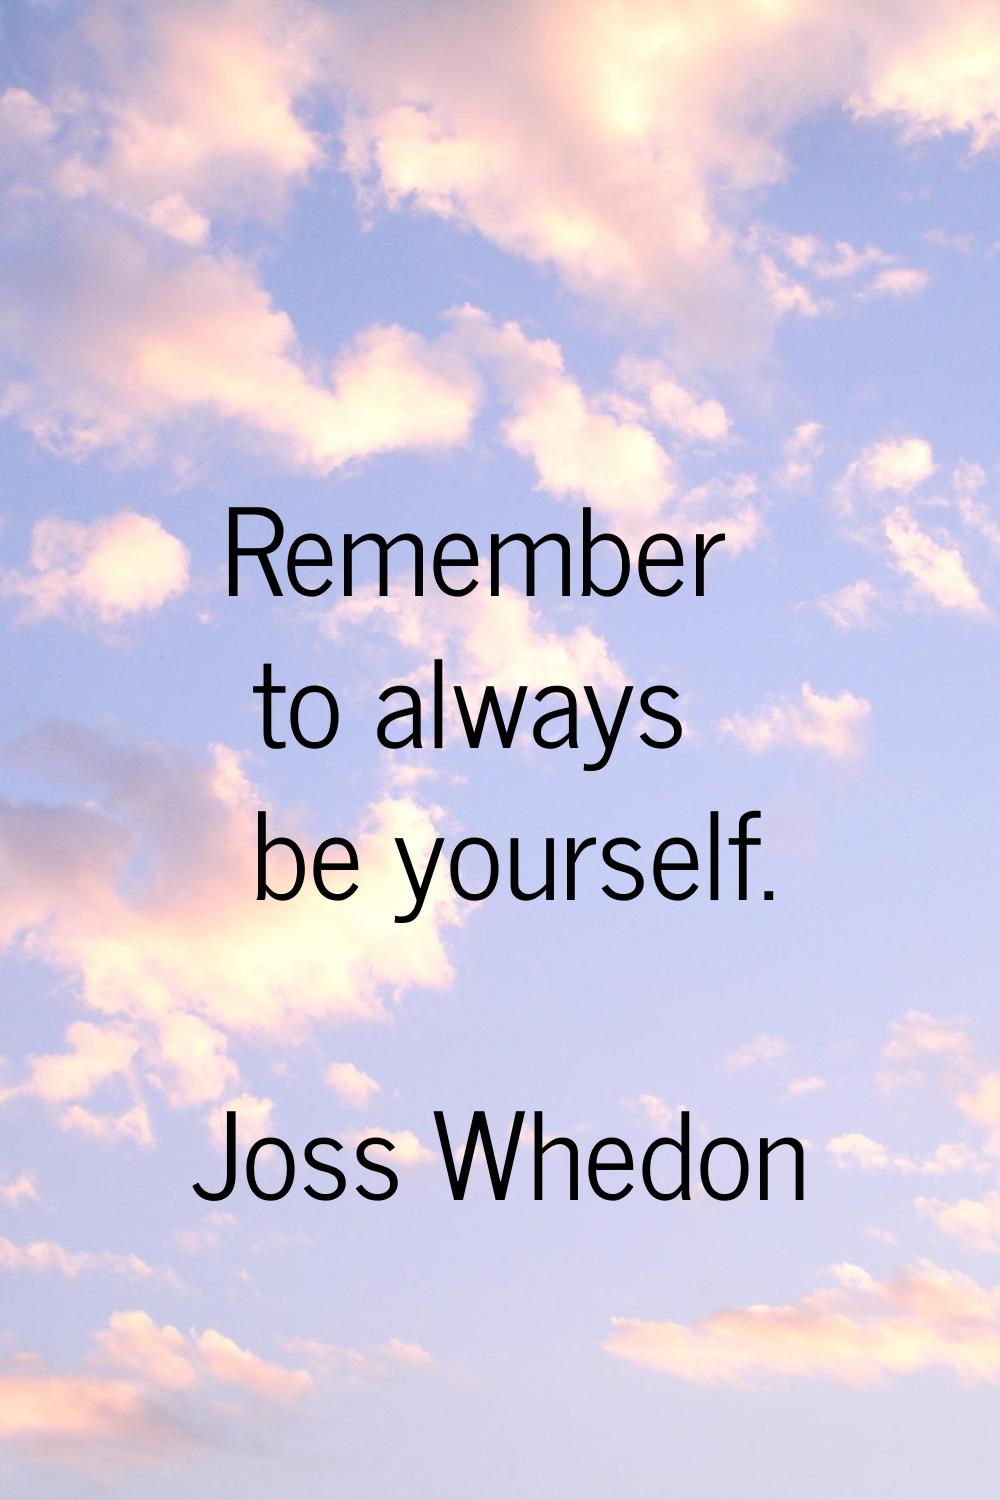 Remember to always be yourself.